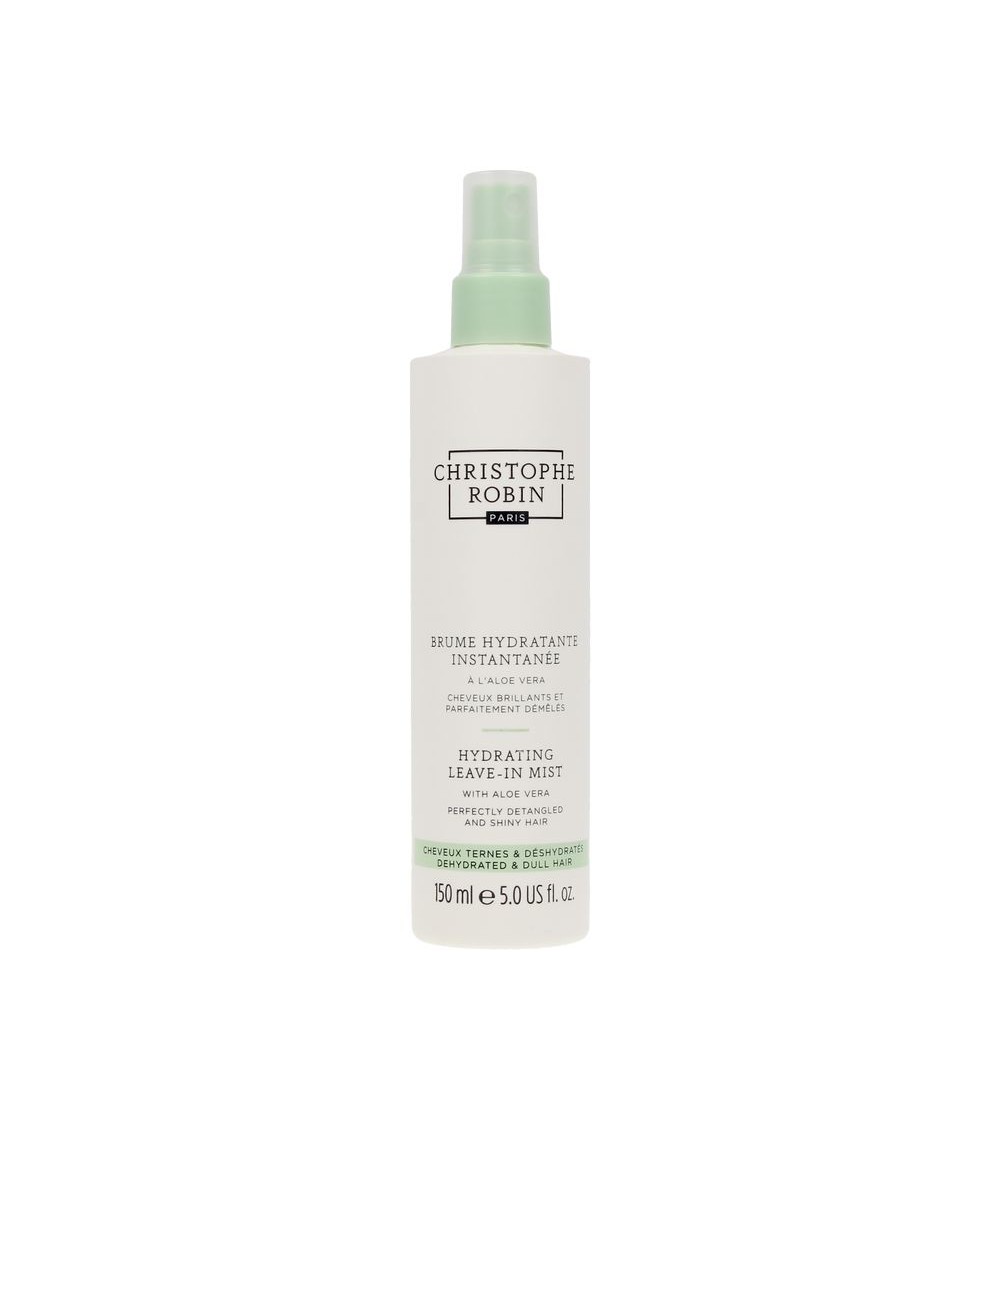 HYDRATING leave-in mist 150 ml